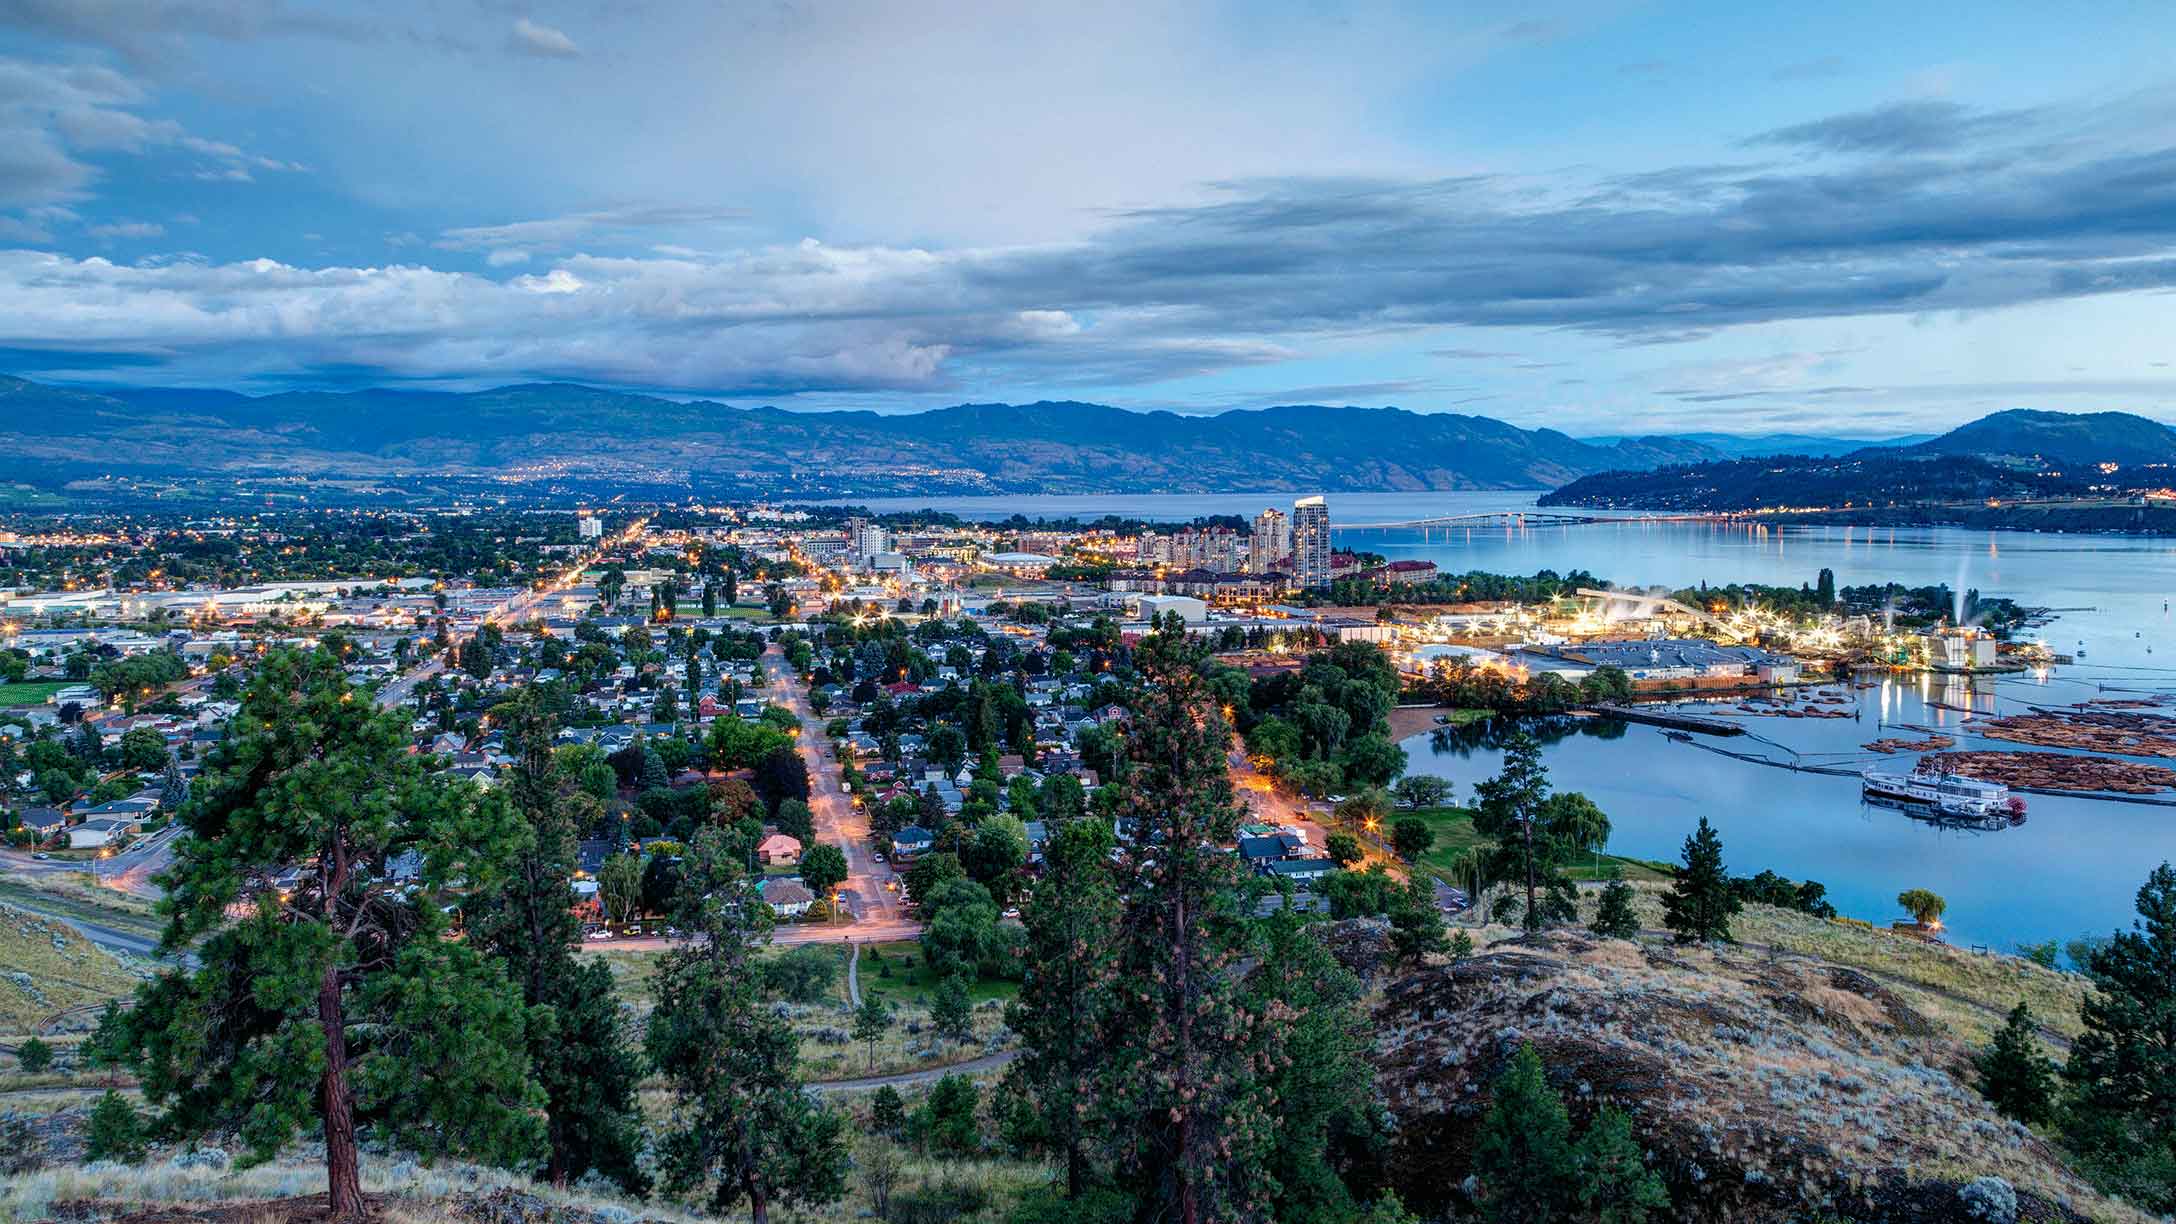 A picture of the city of Kelowna